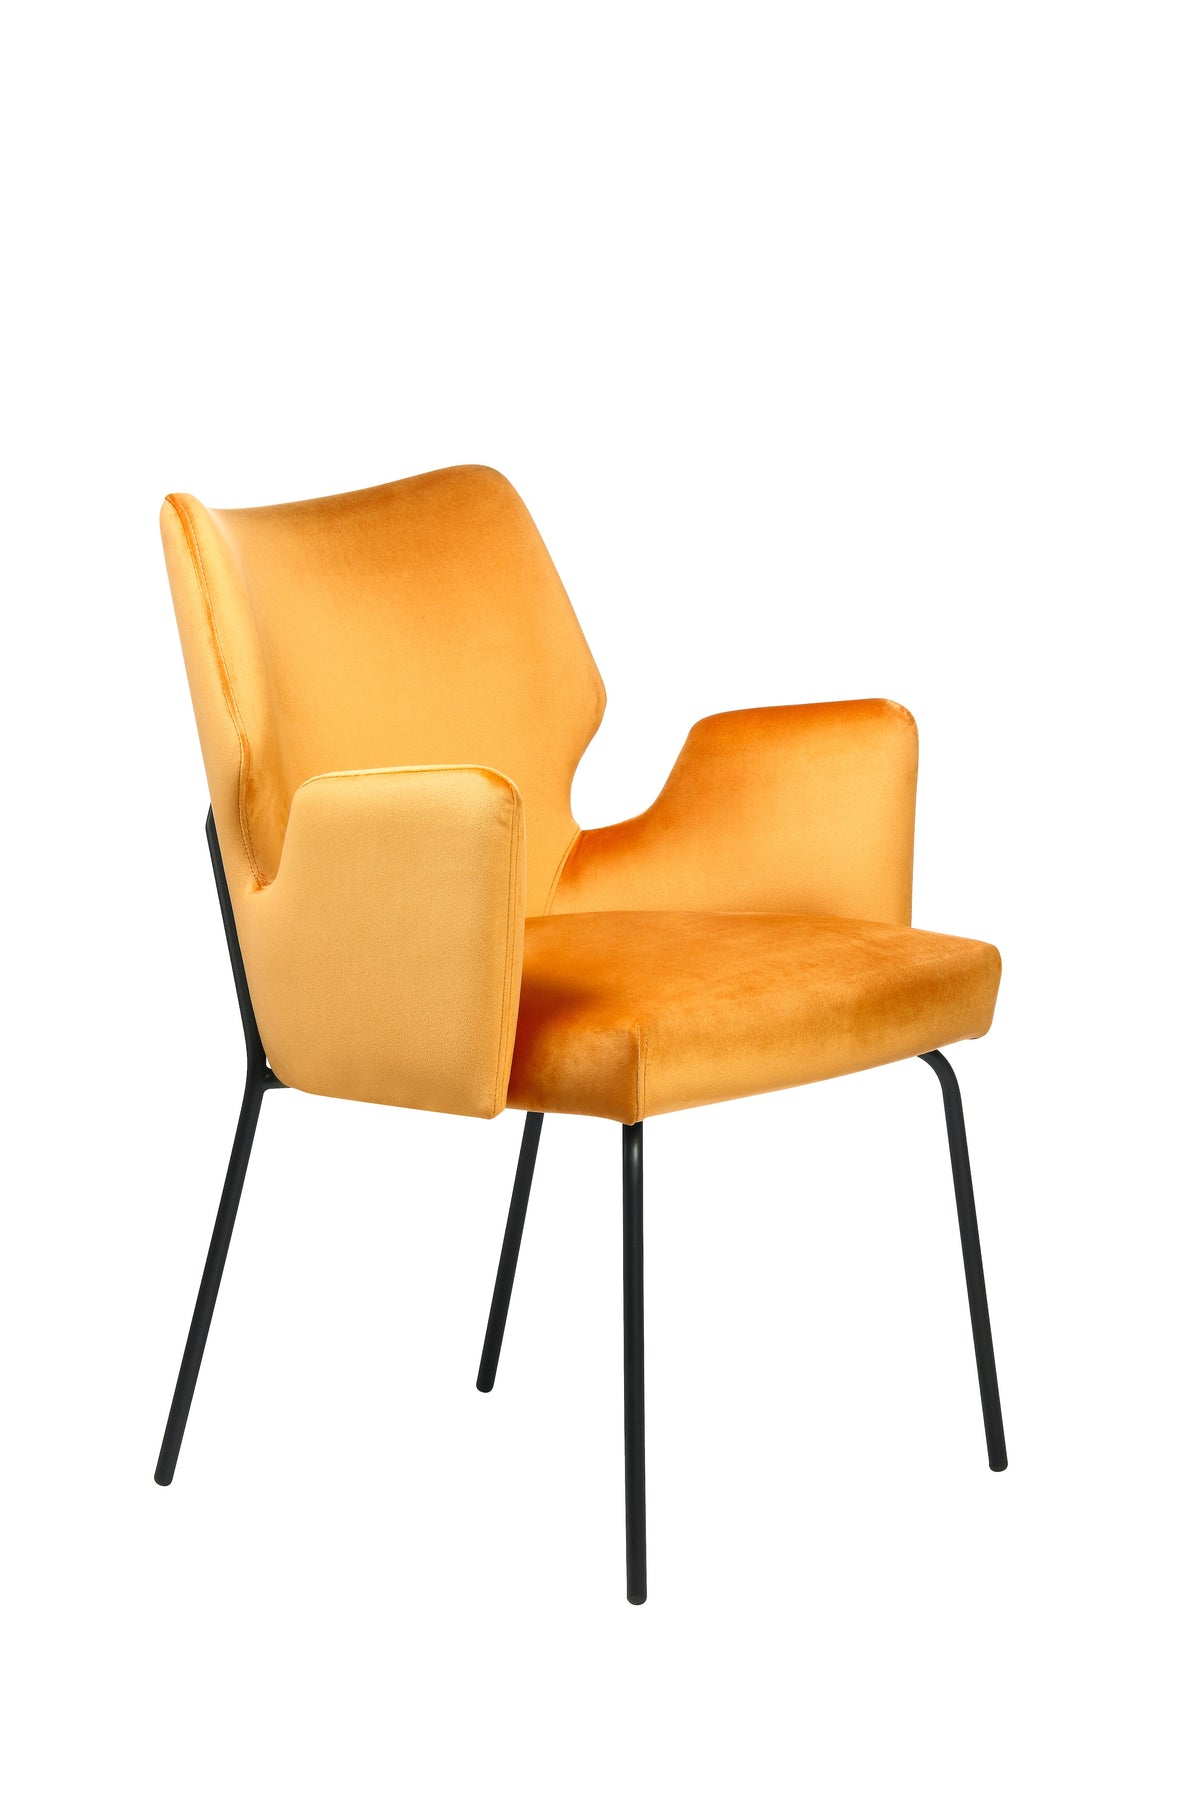 Gent Metal/A Armchair-Contractin-Contract Furniture Store